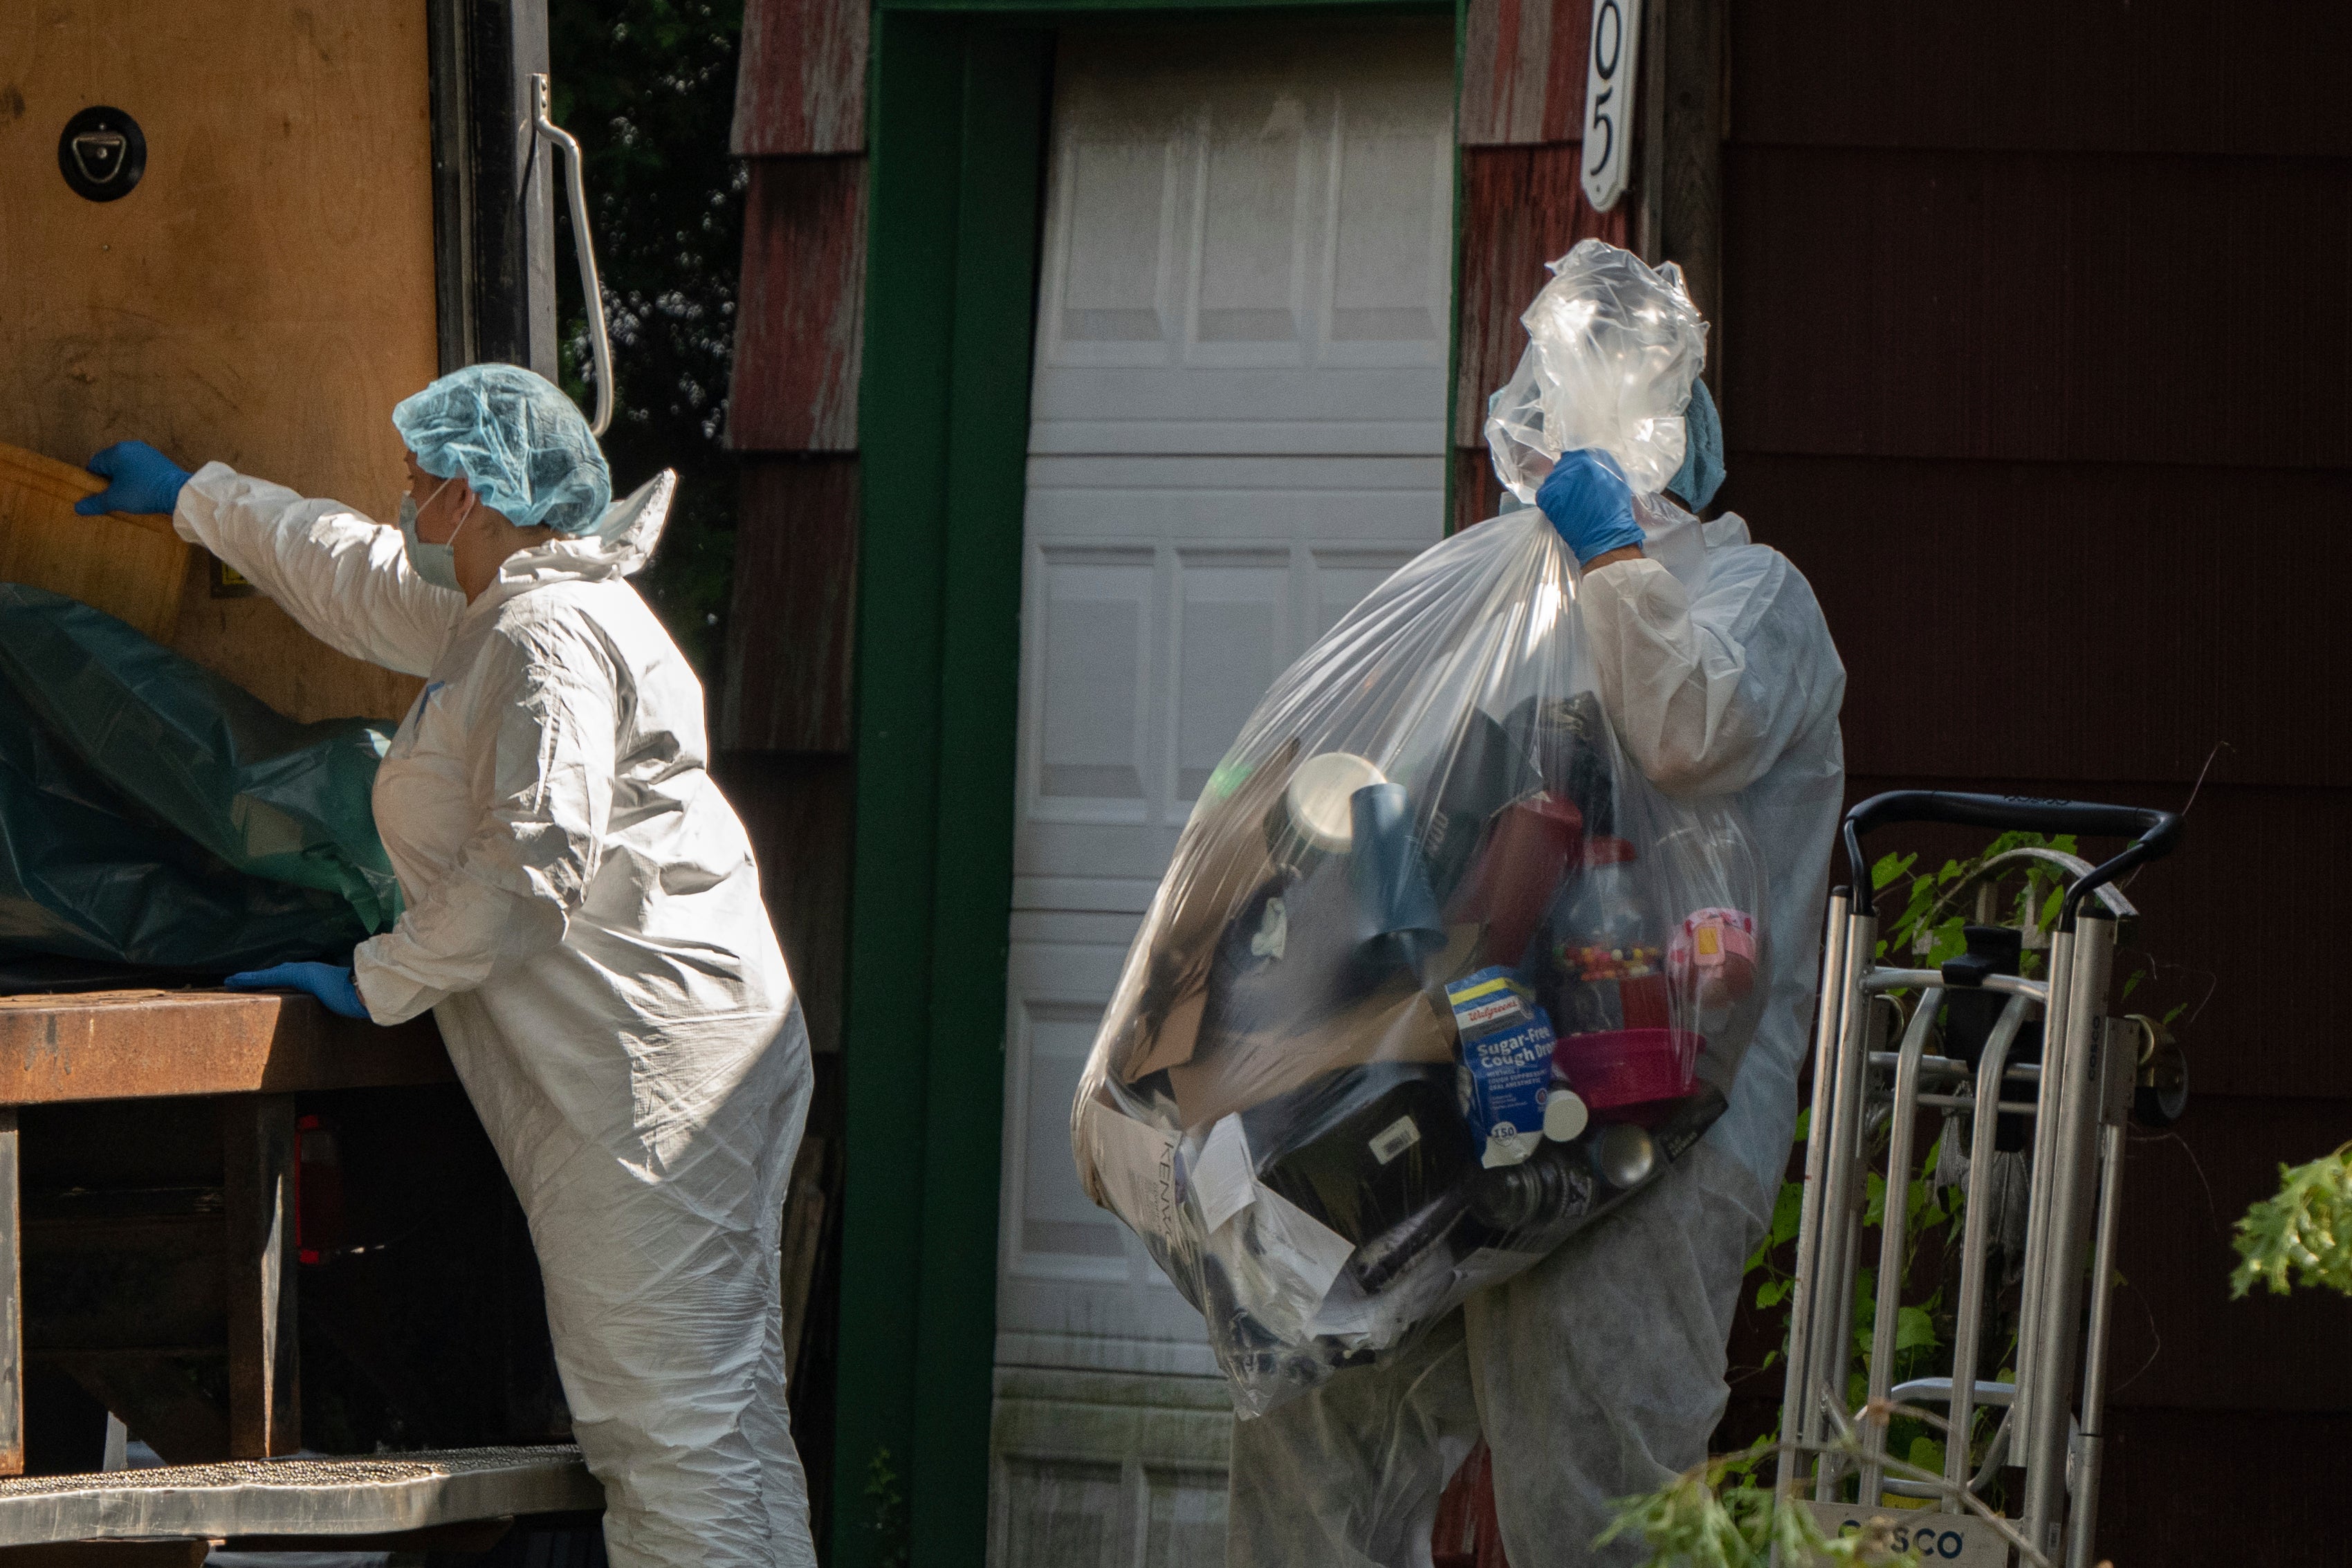 A crime laboratory officer moves a plastic bag of items as law enforcement searches the home of Rex Heuermann, Saturday, July 15, 2023, in Massapequa Park, N.Y.